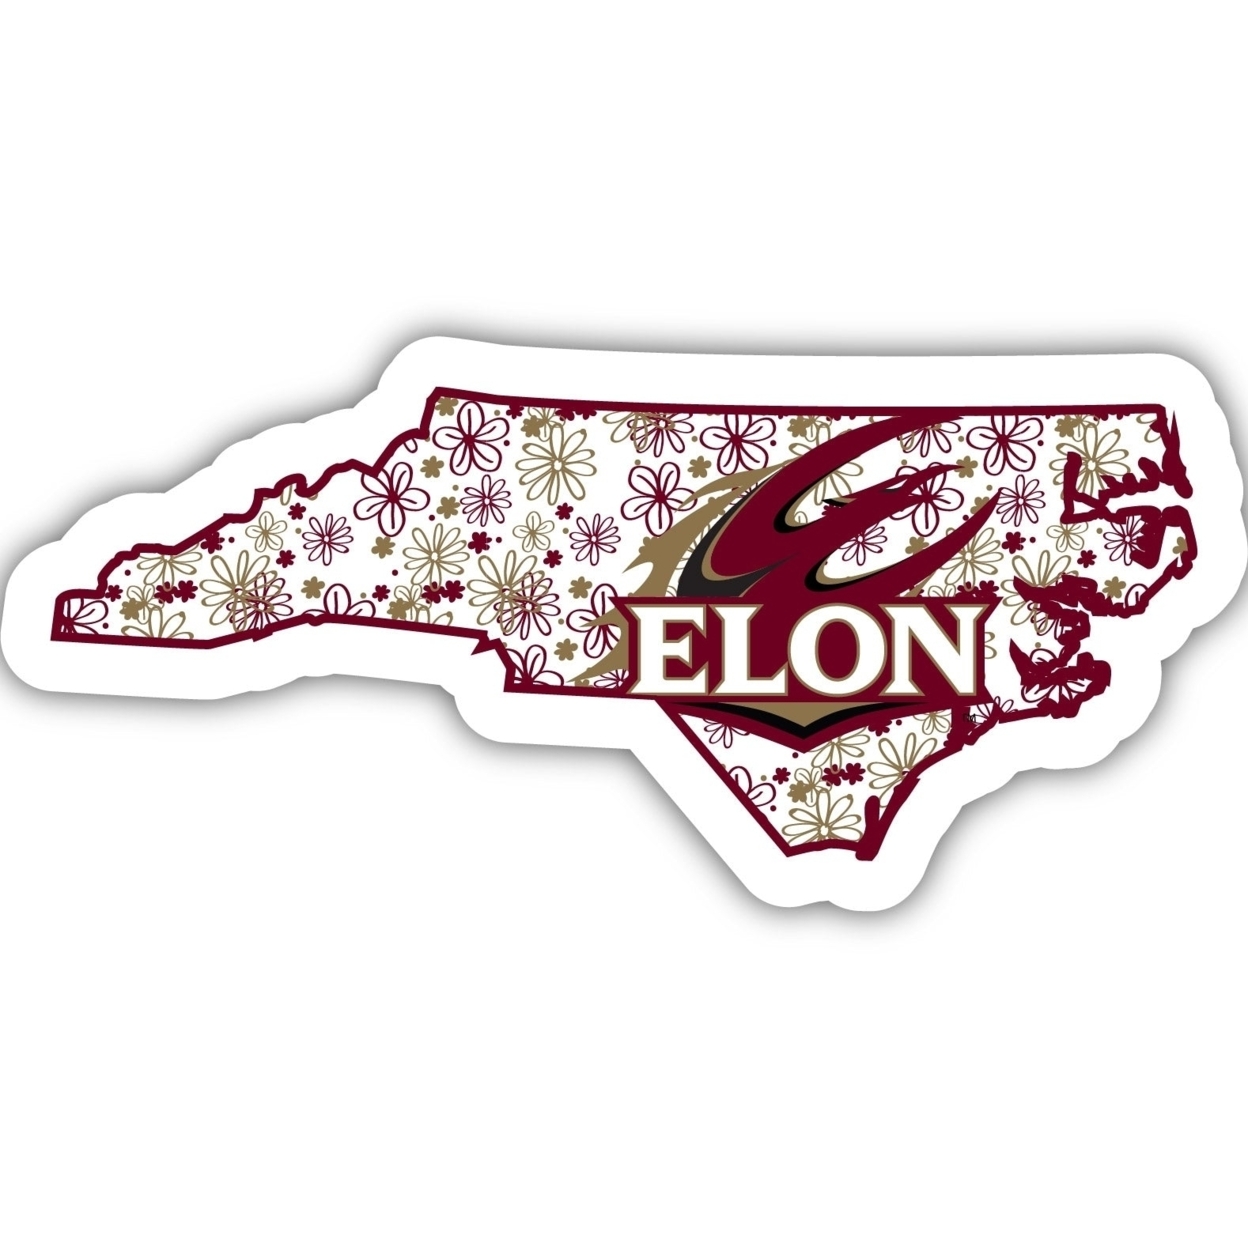 Elon University Floral State Die Cut Decal 2-Inch